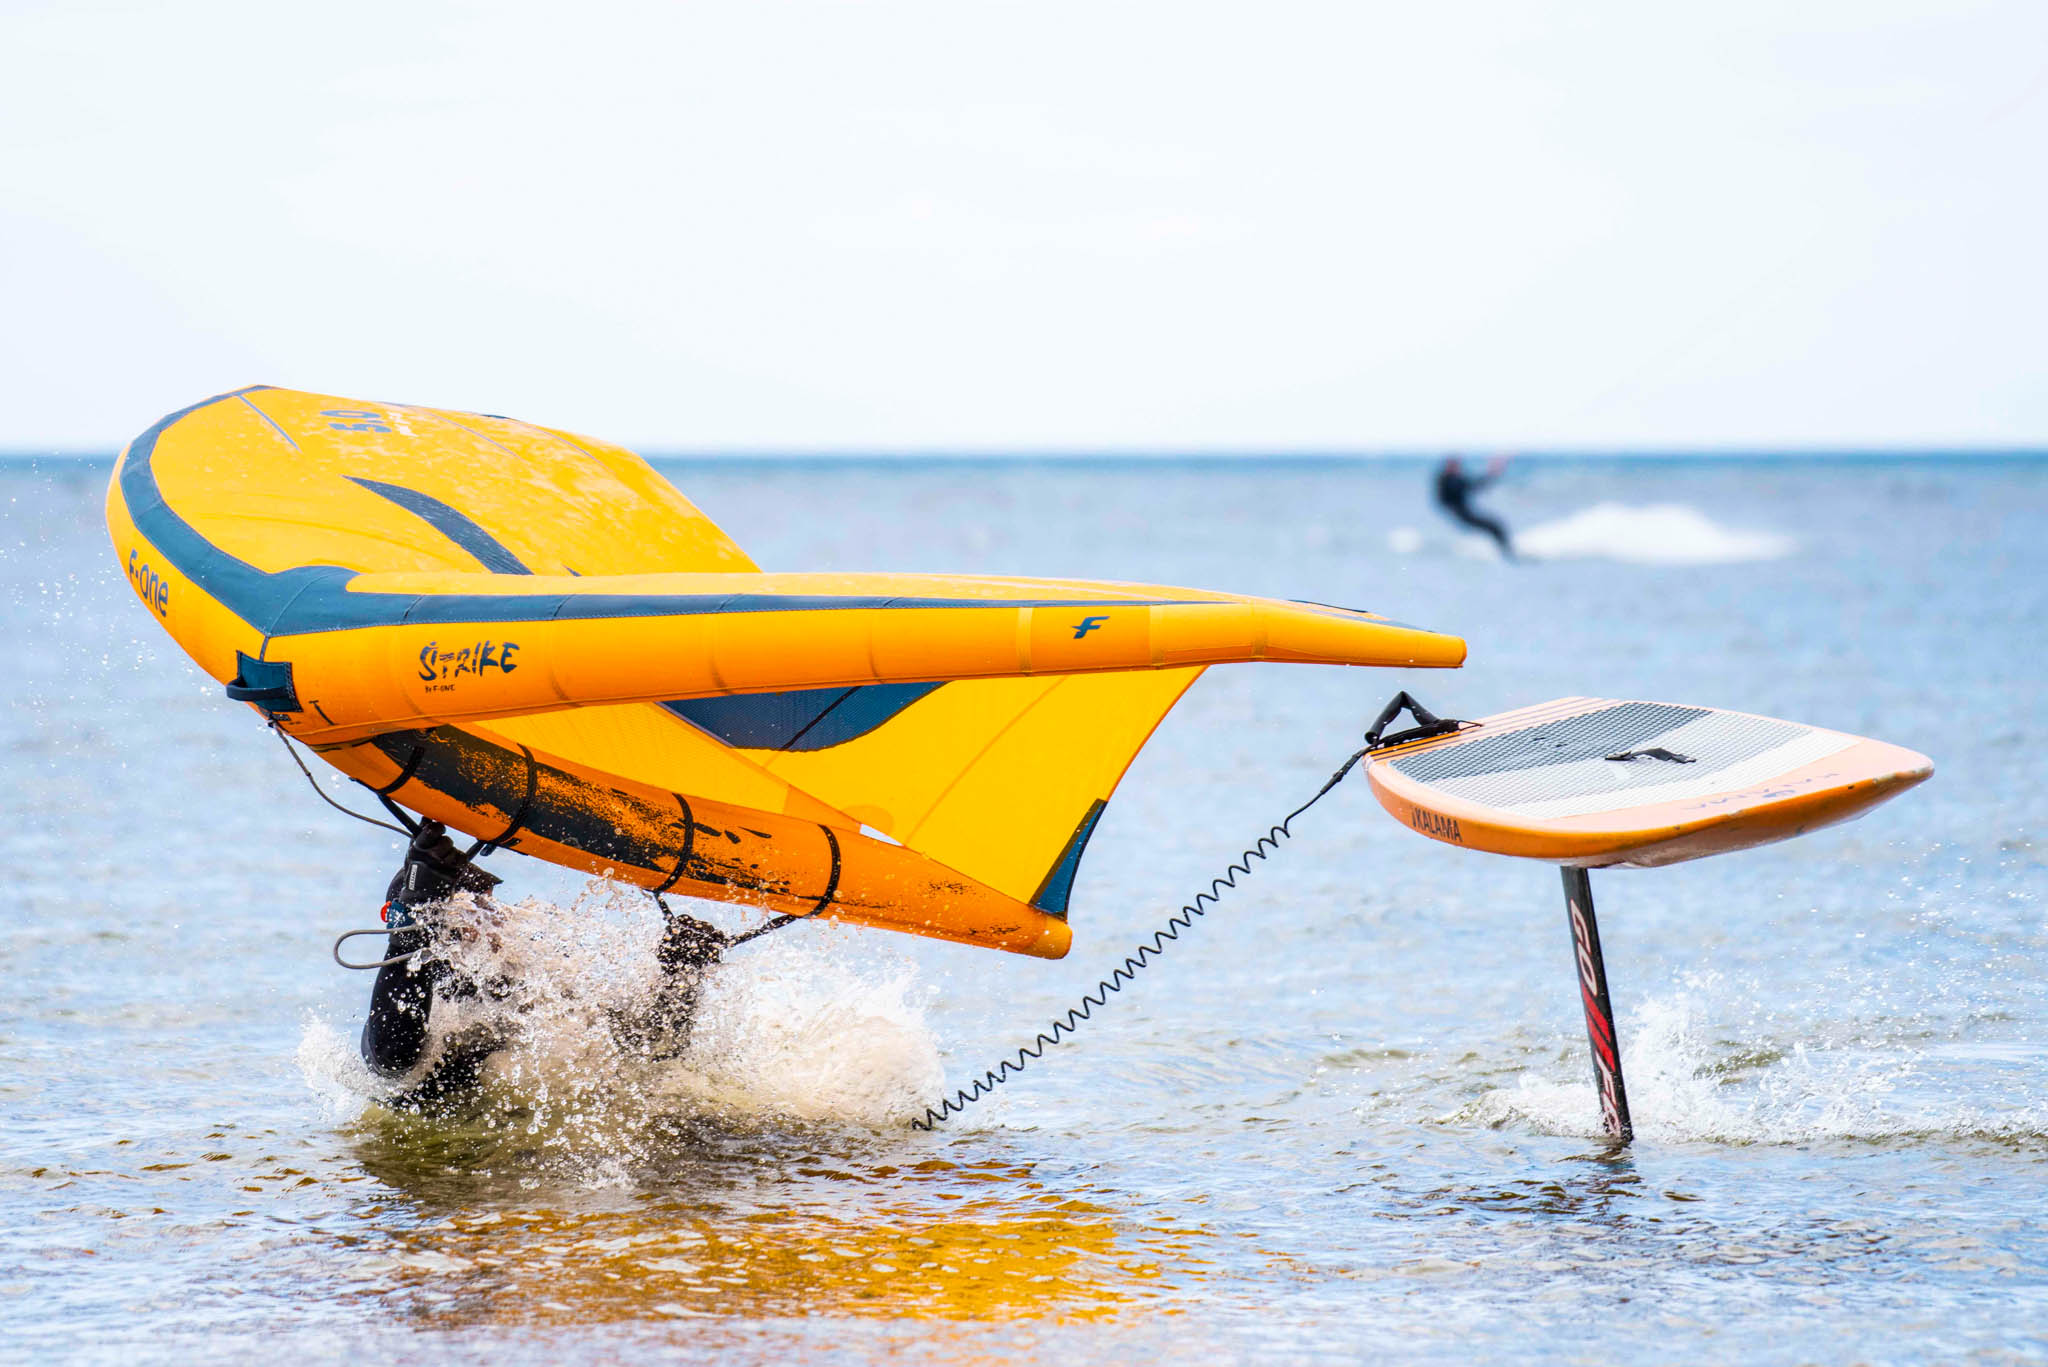 Wing Foiling Will Make You a Better Person - MACkite Boardsports Center